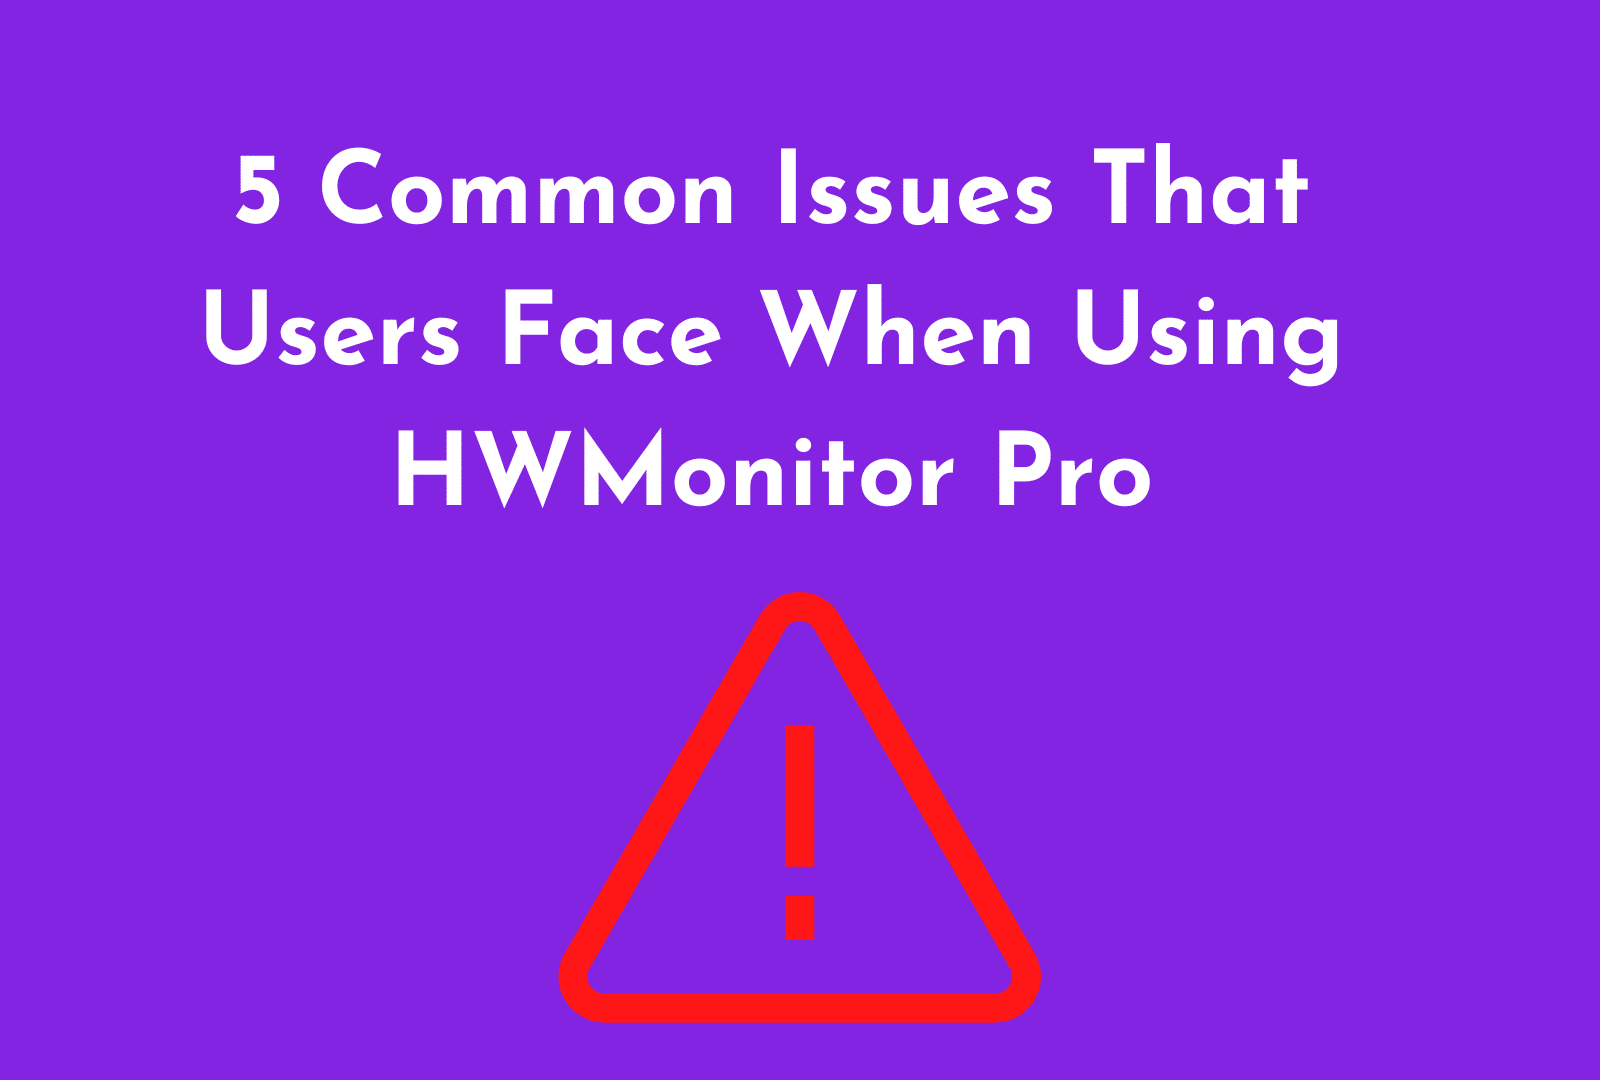 C:\Users\Mohsin\Downloads\Common Issues That Users Face When Using HWMonitor Pro.png